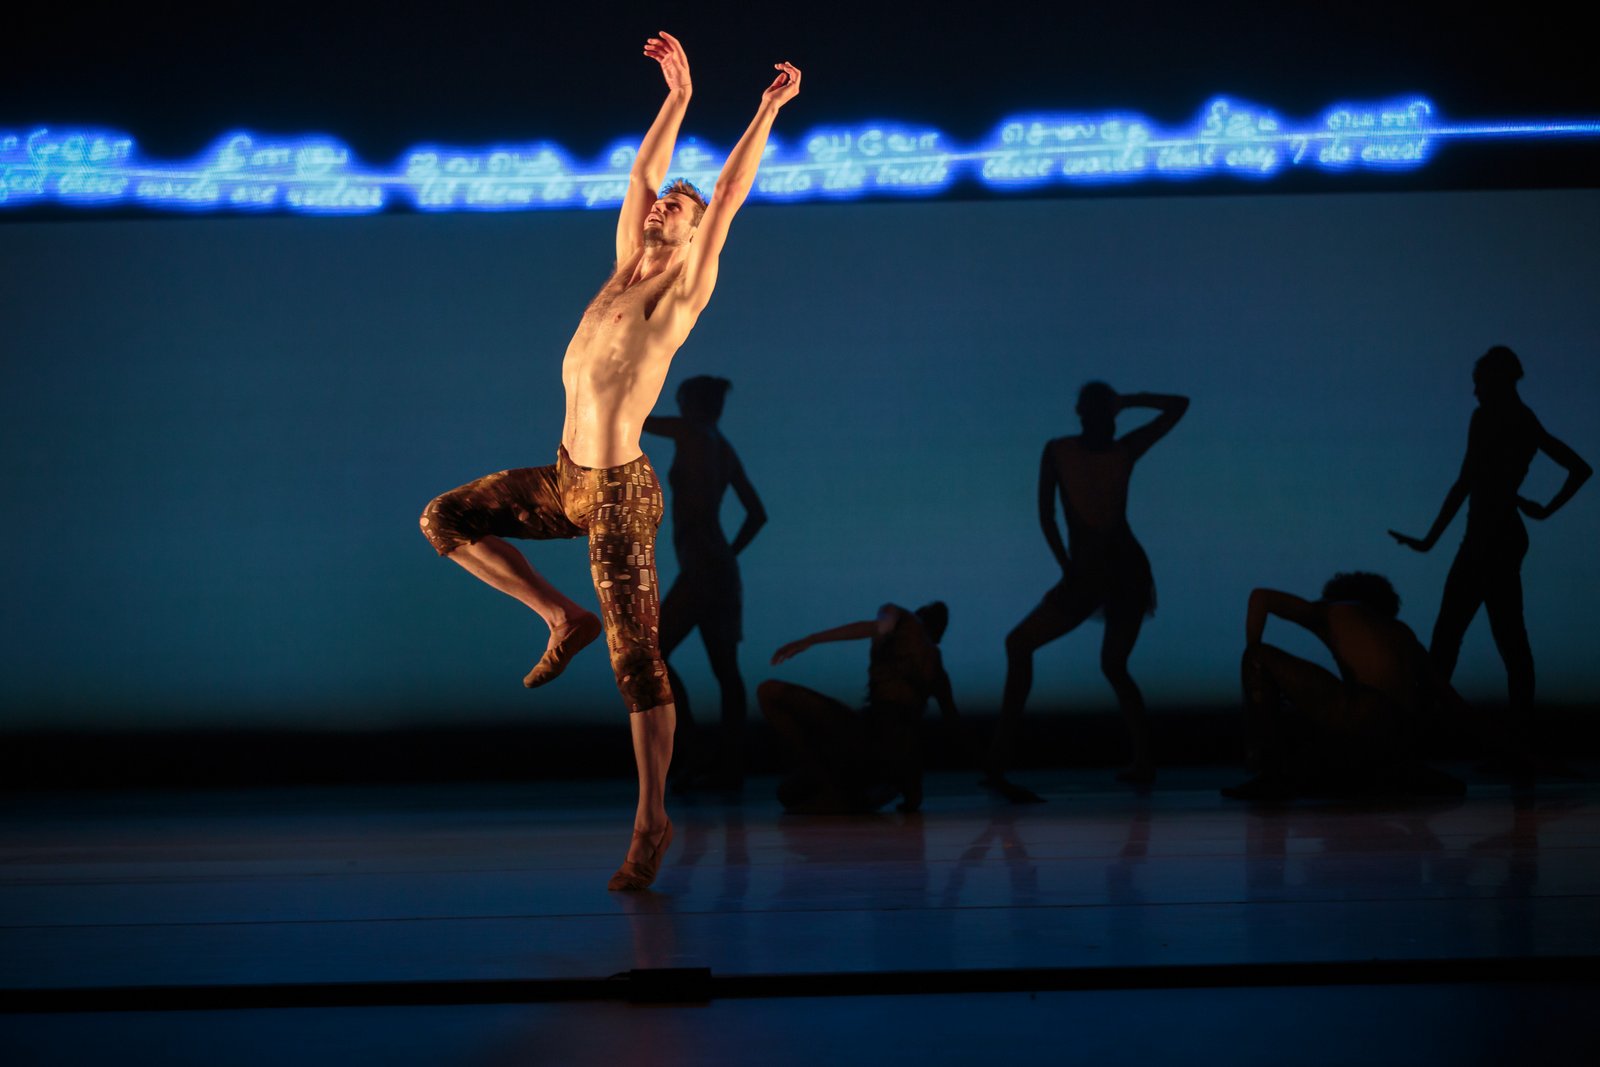 Alonzo King Lines Ballet: Robb Beresford in Figures of Speech; PHOTO CREDIT: ©Chris Hardy